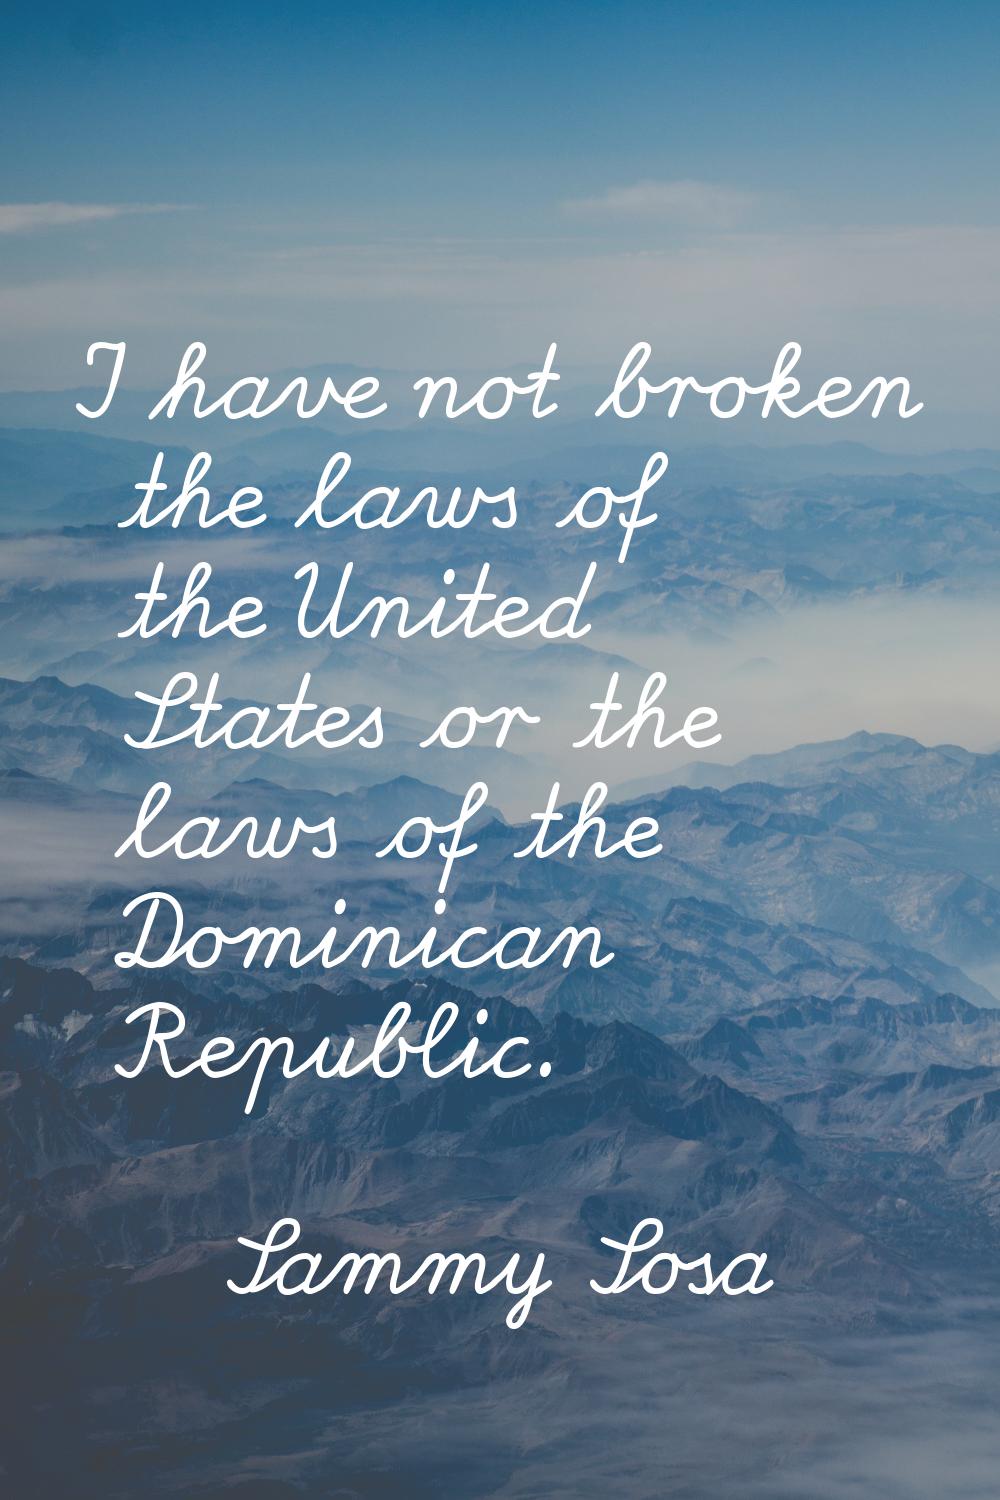 I have not broken the laws of the United States or the laws of the Dominican Republic.